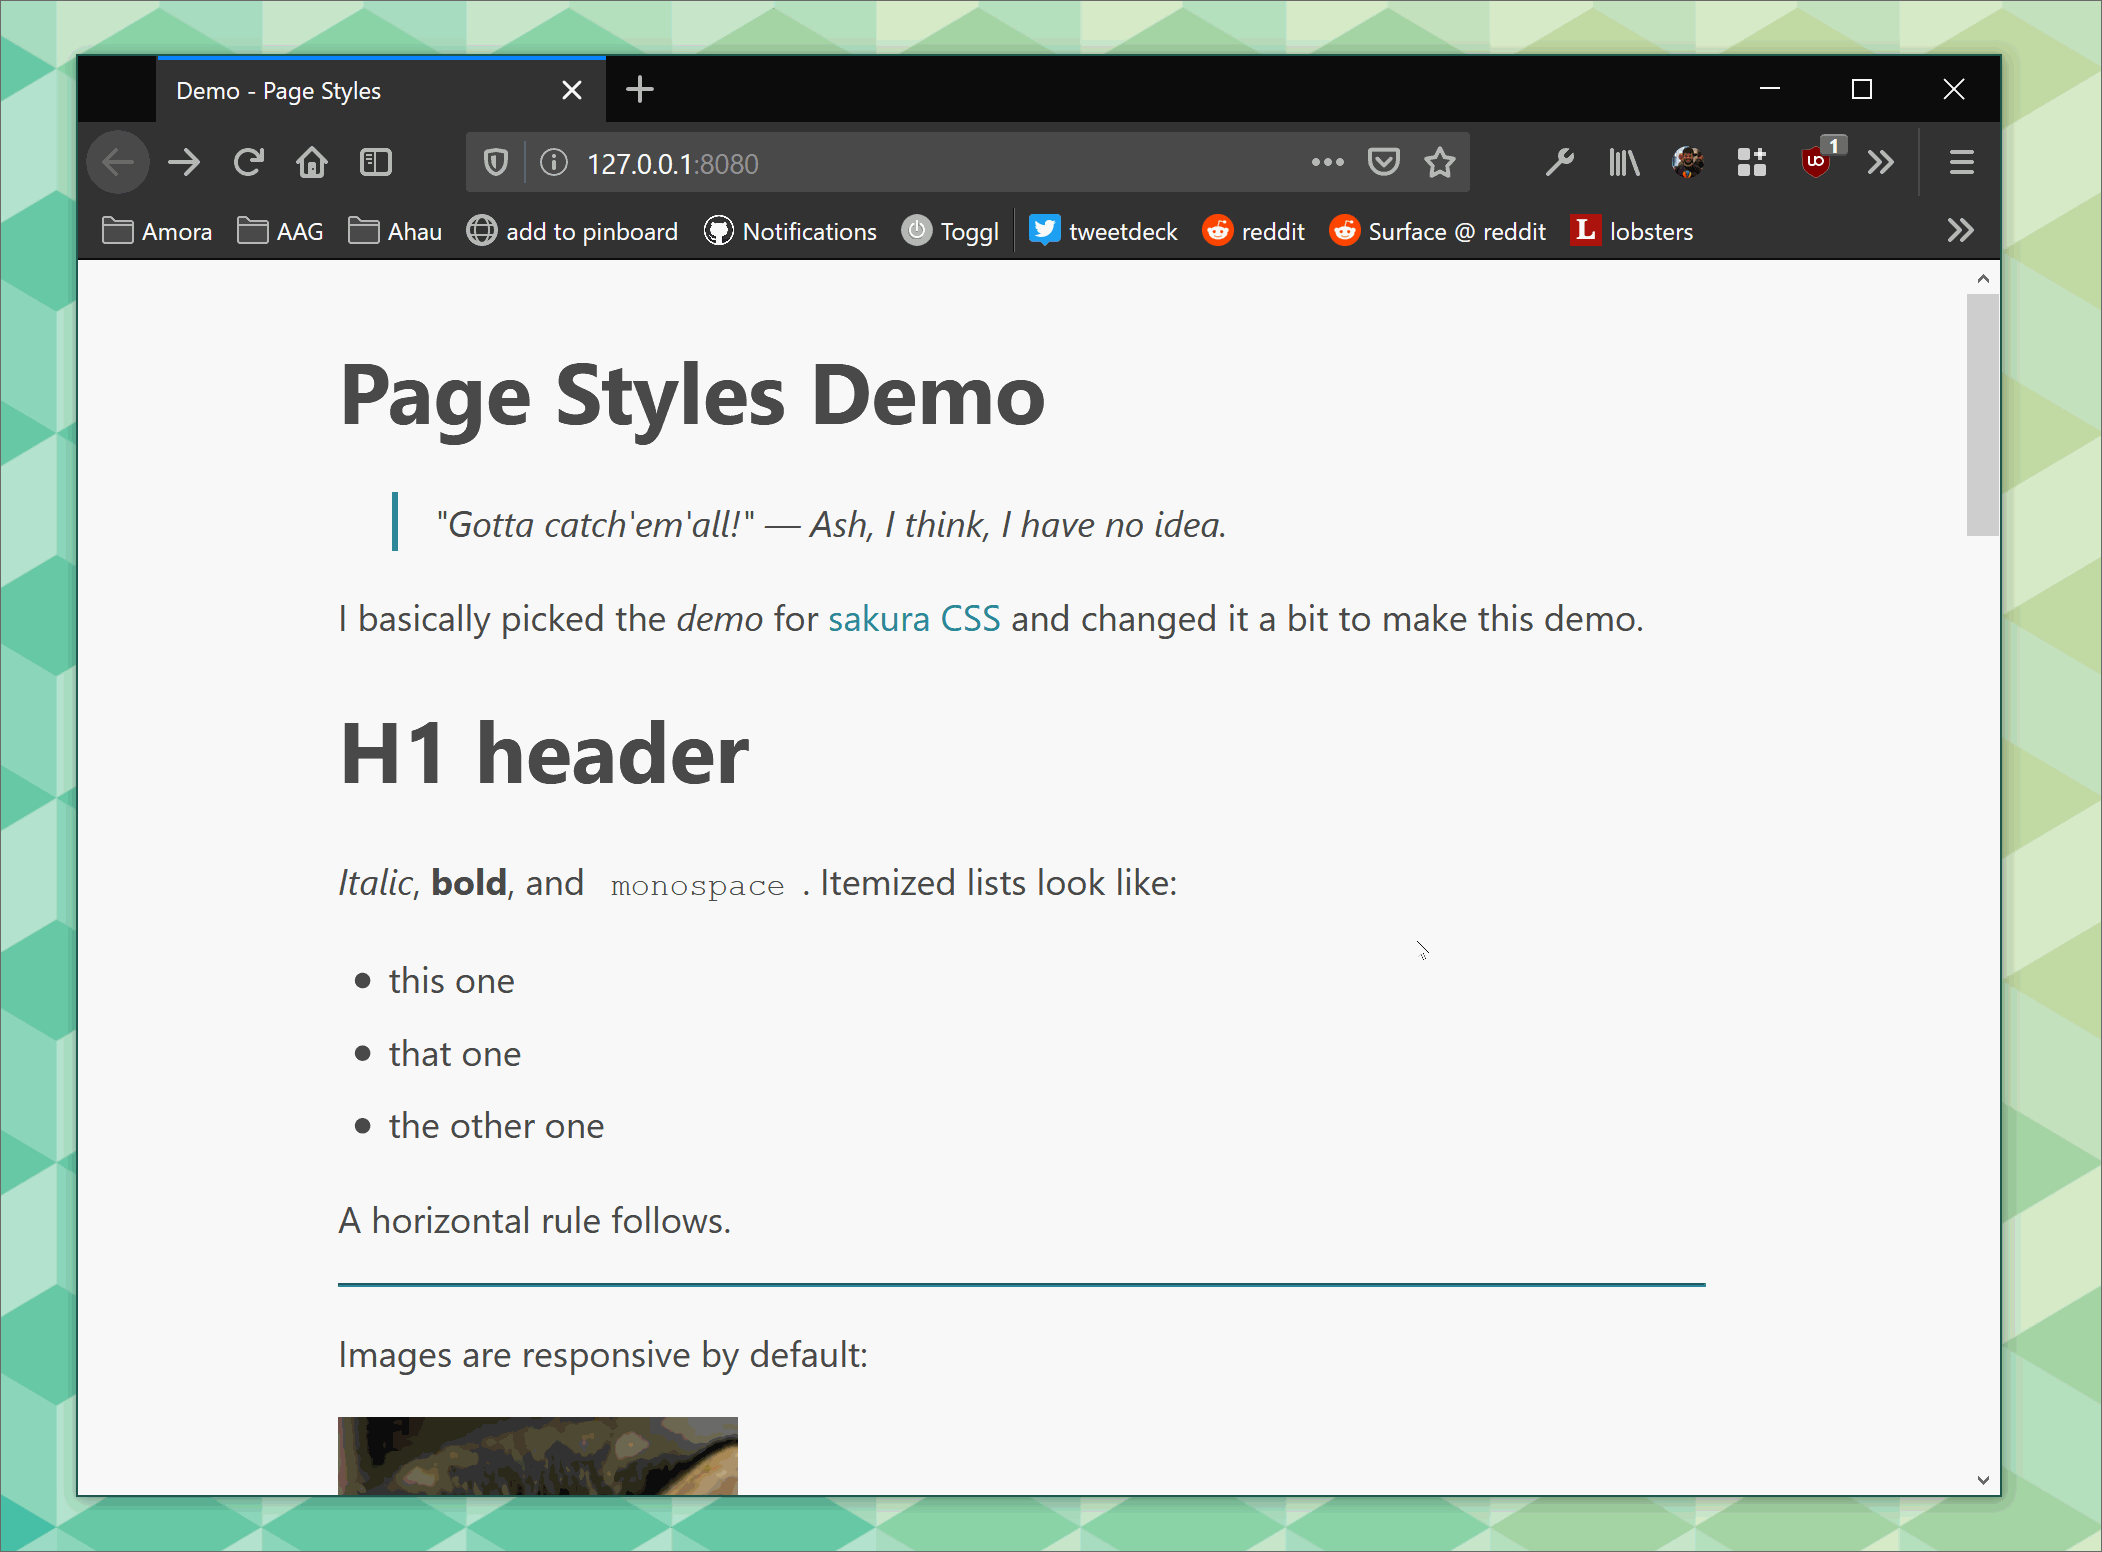 Demoing page styles